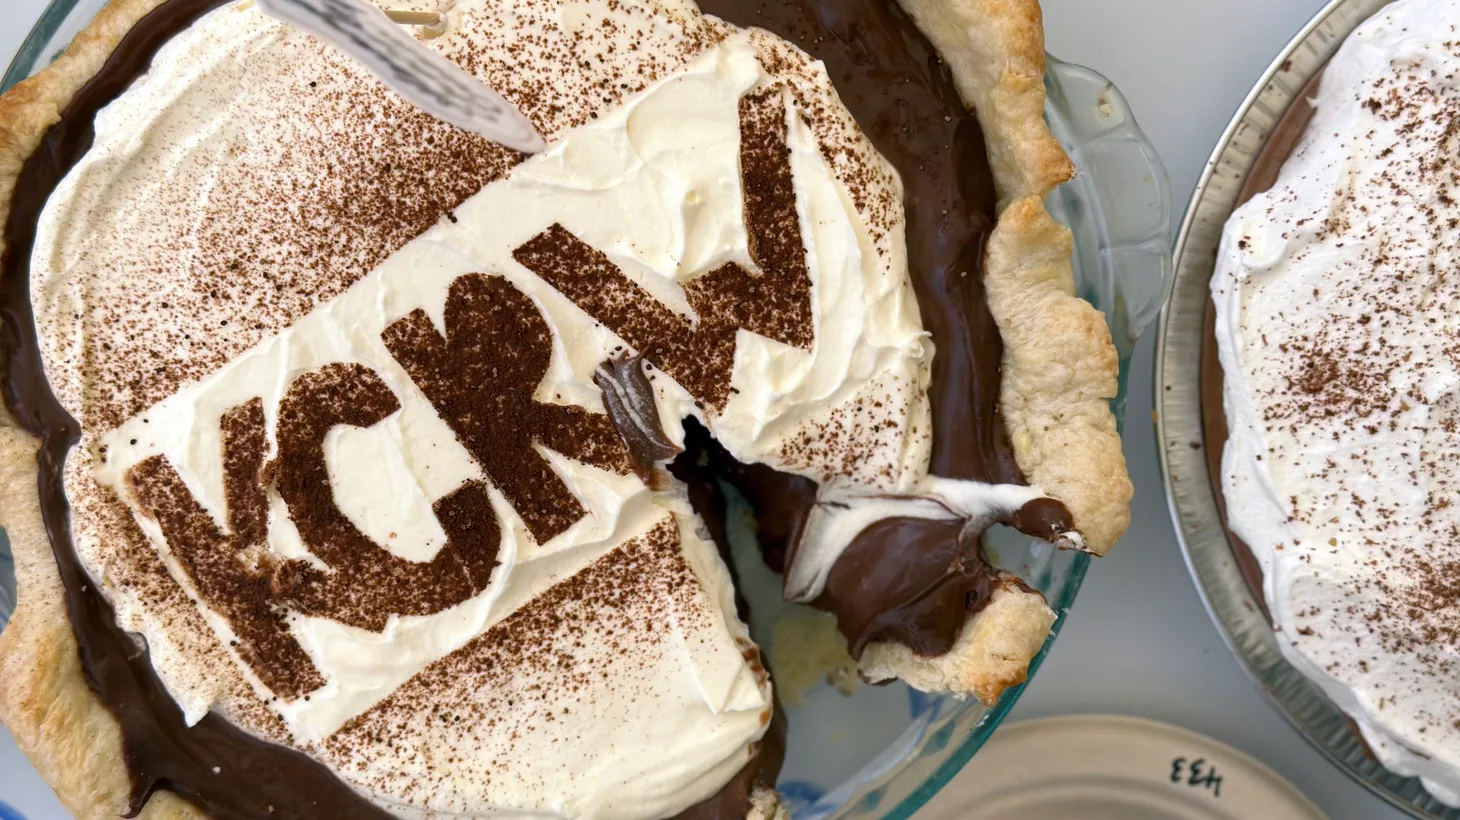 This pie may not have won, but it had a lot of visual appeal.